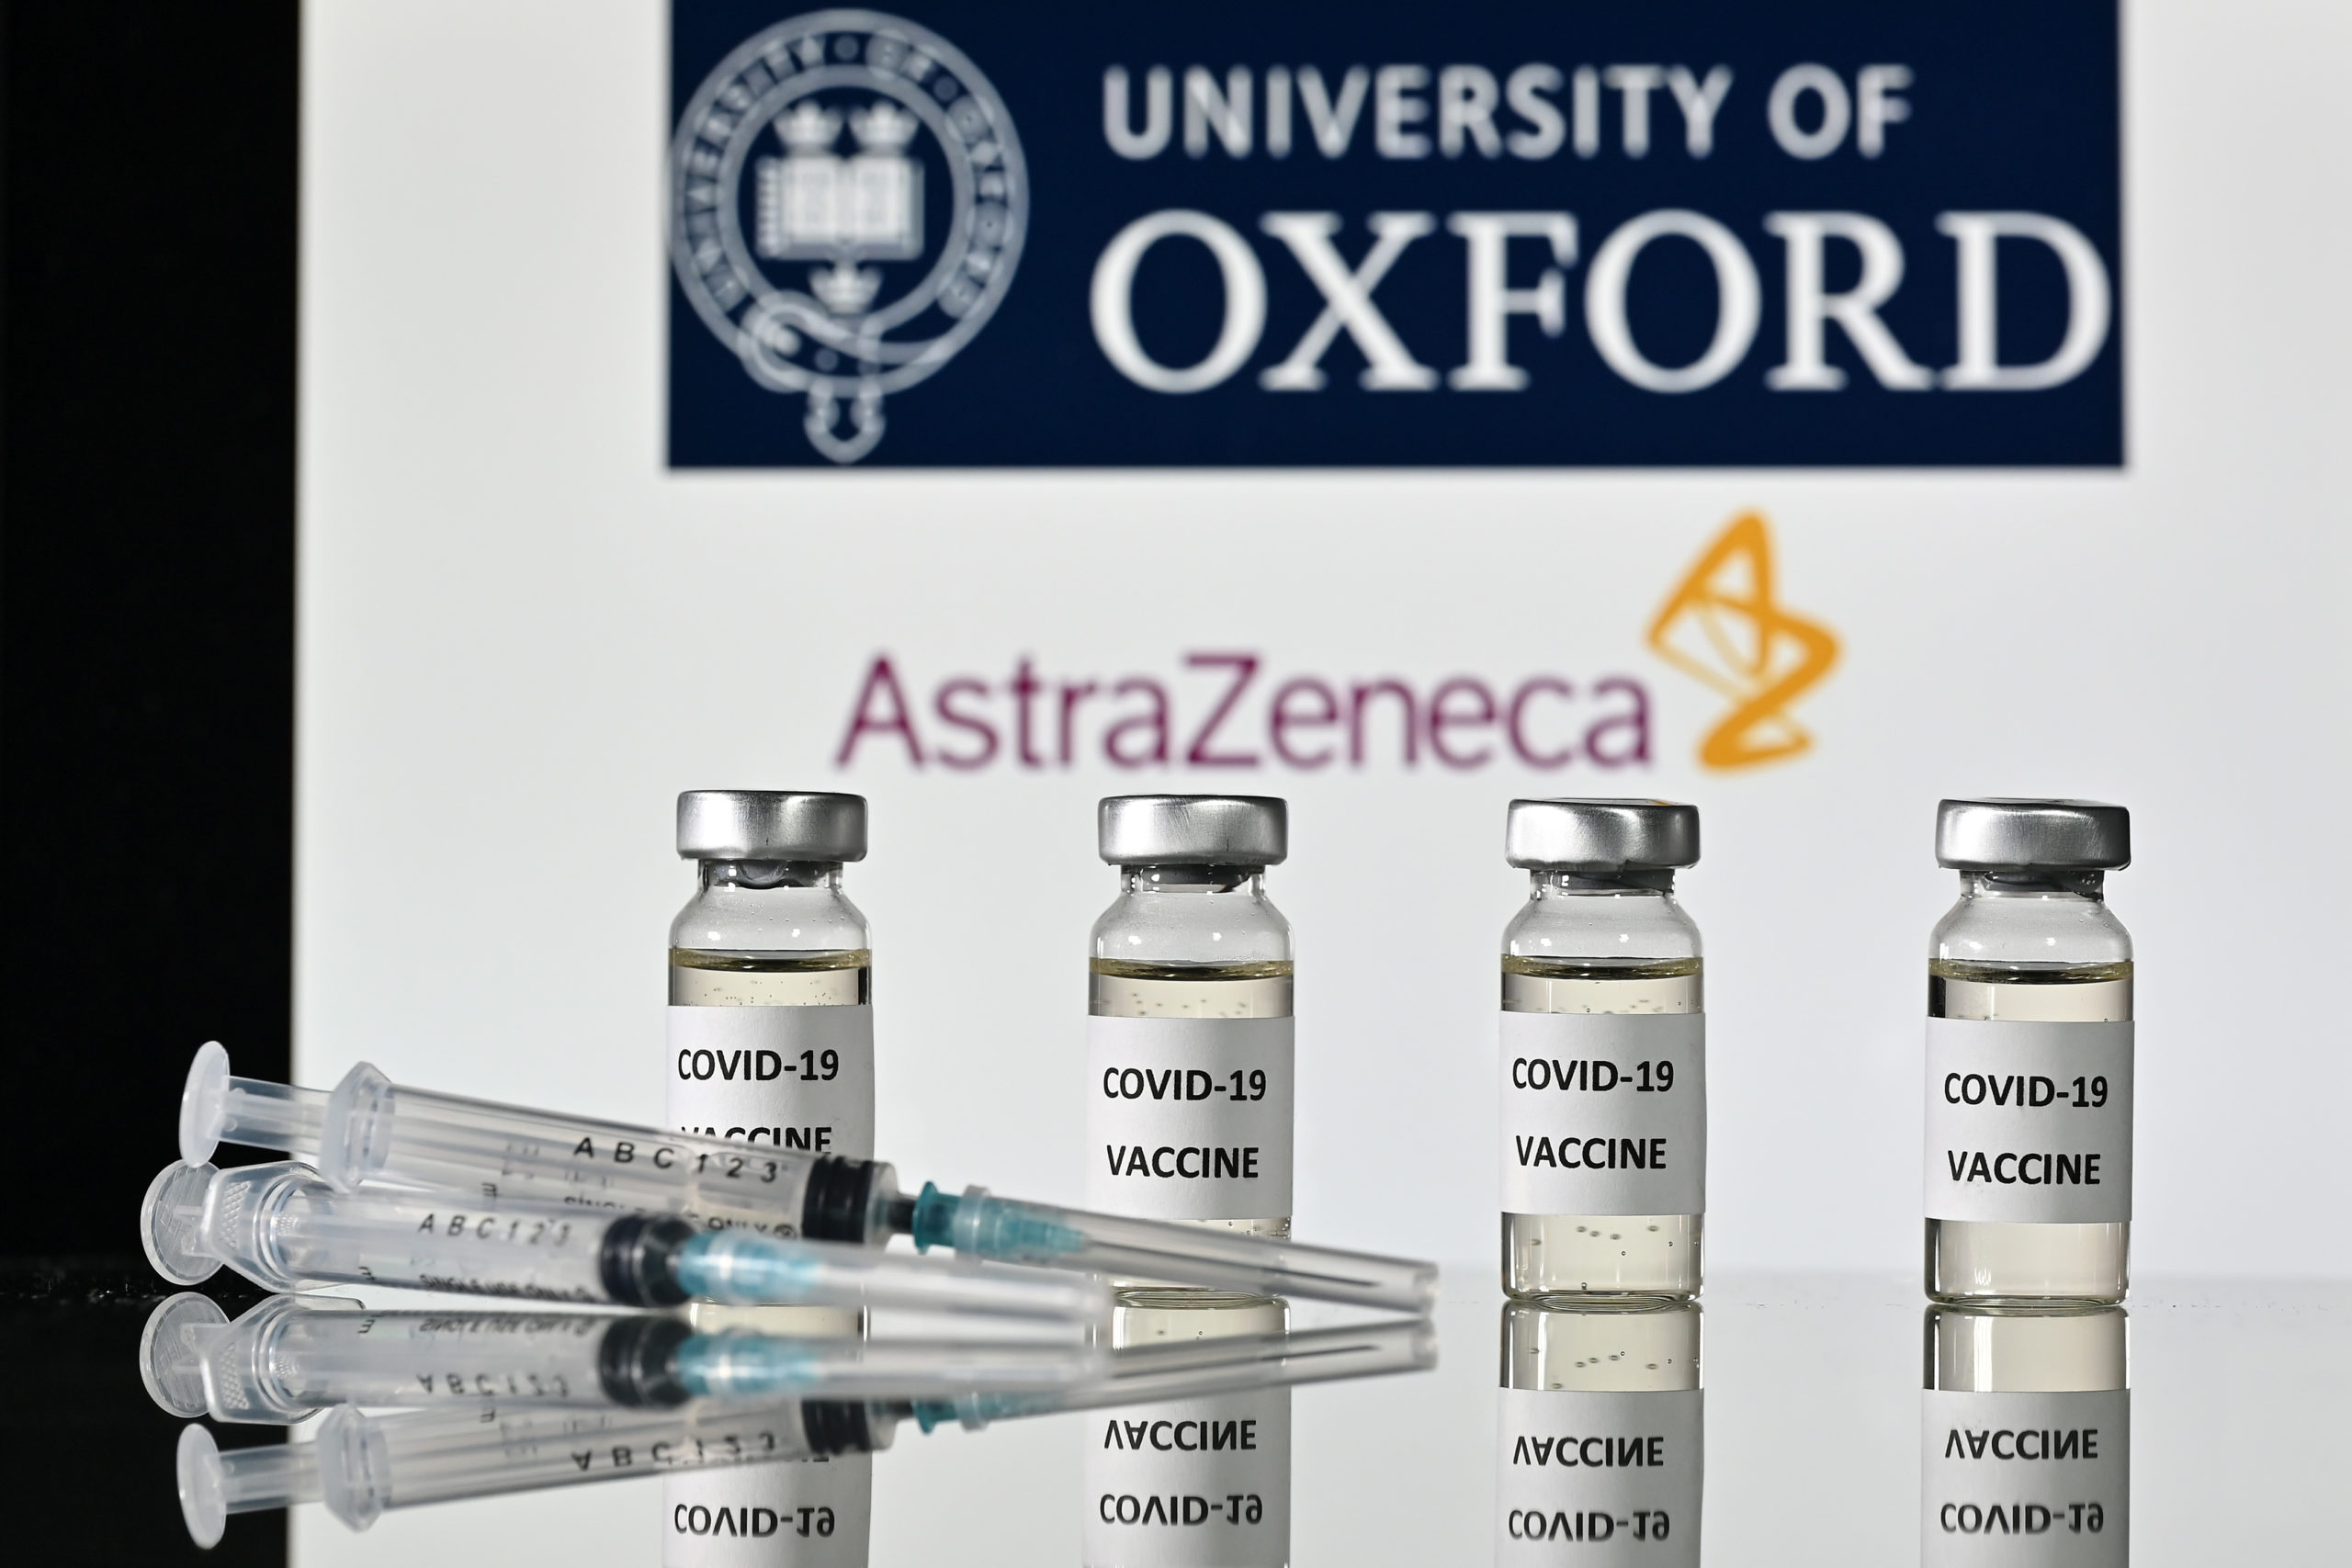 An illustration picture shows vials with Covid-19 Vaccine stickers attached and syringes, with the logo of the University of Oxford and its partner British pharmaceutical company AstraZeneca, on November 17, 2020. (Photo by JUSTIN TALLIS/AFP via Getty Images)